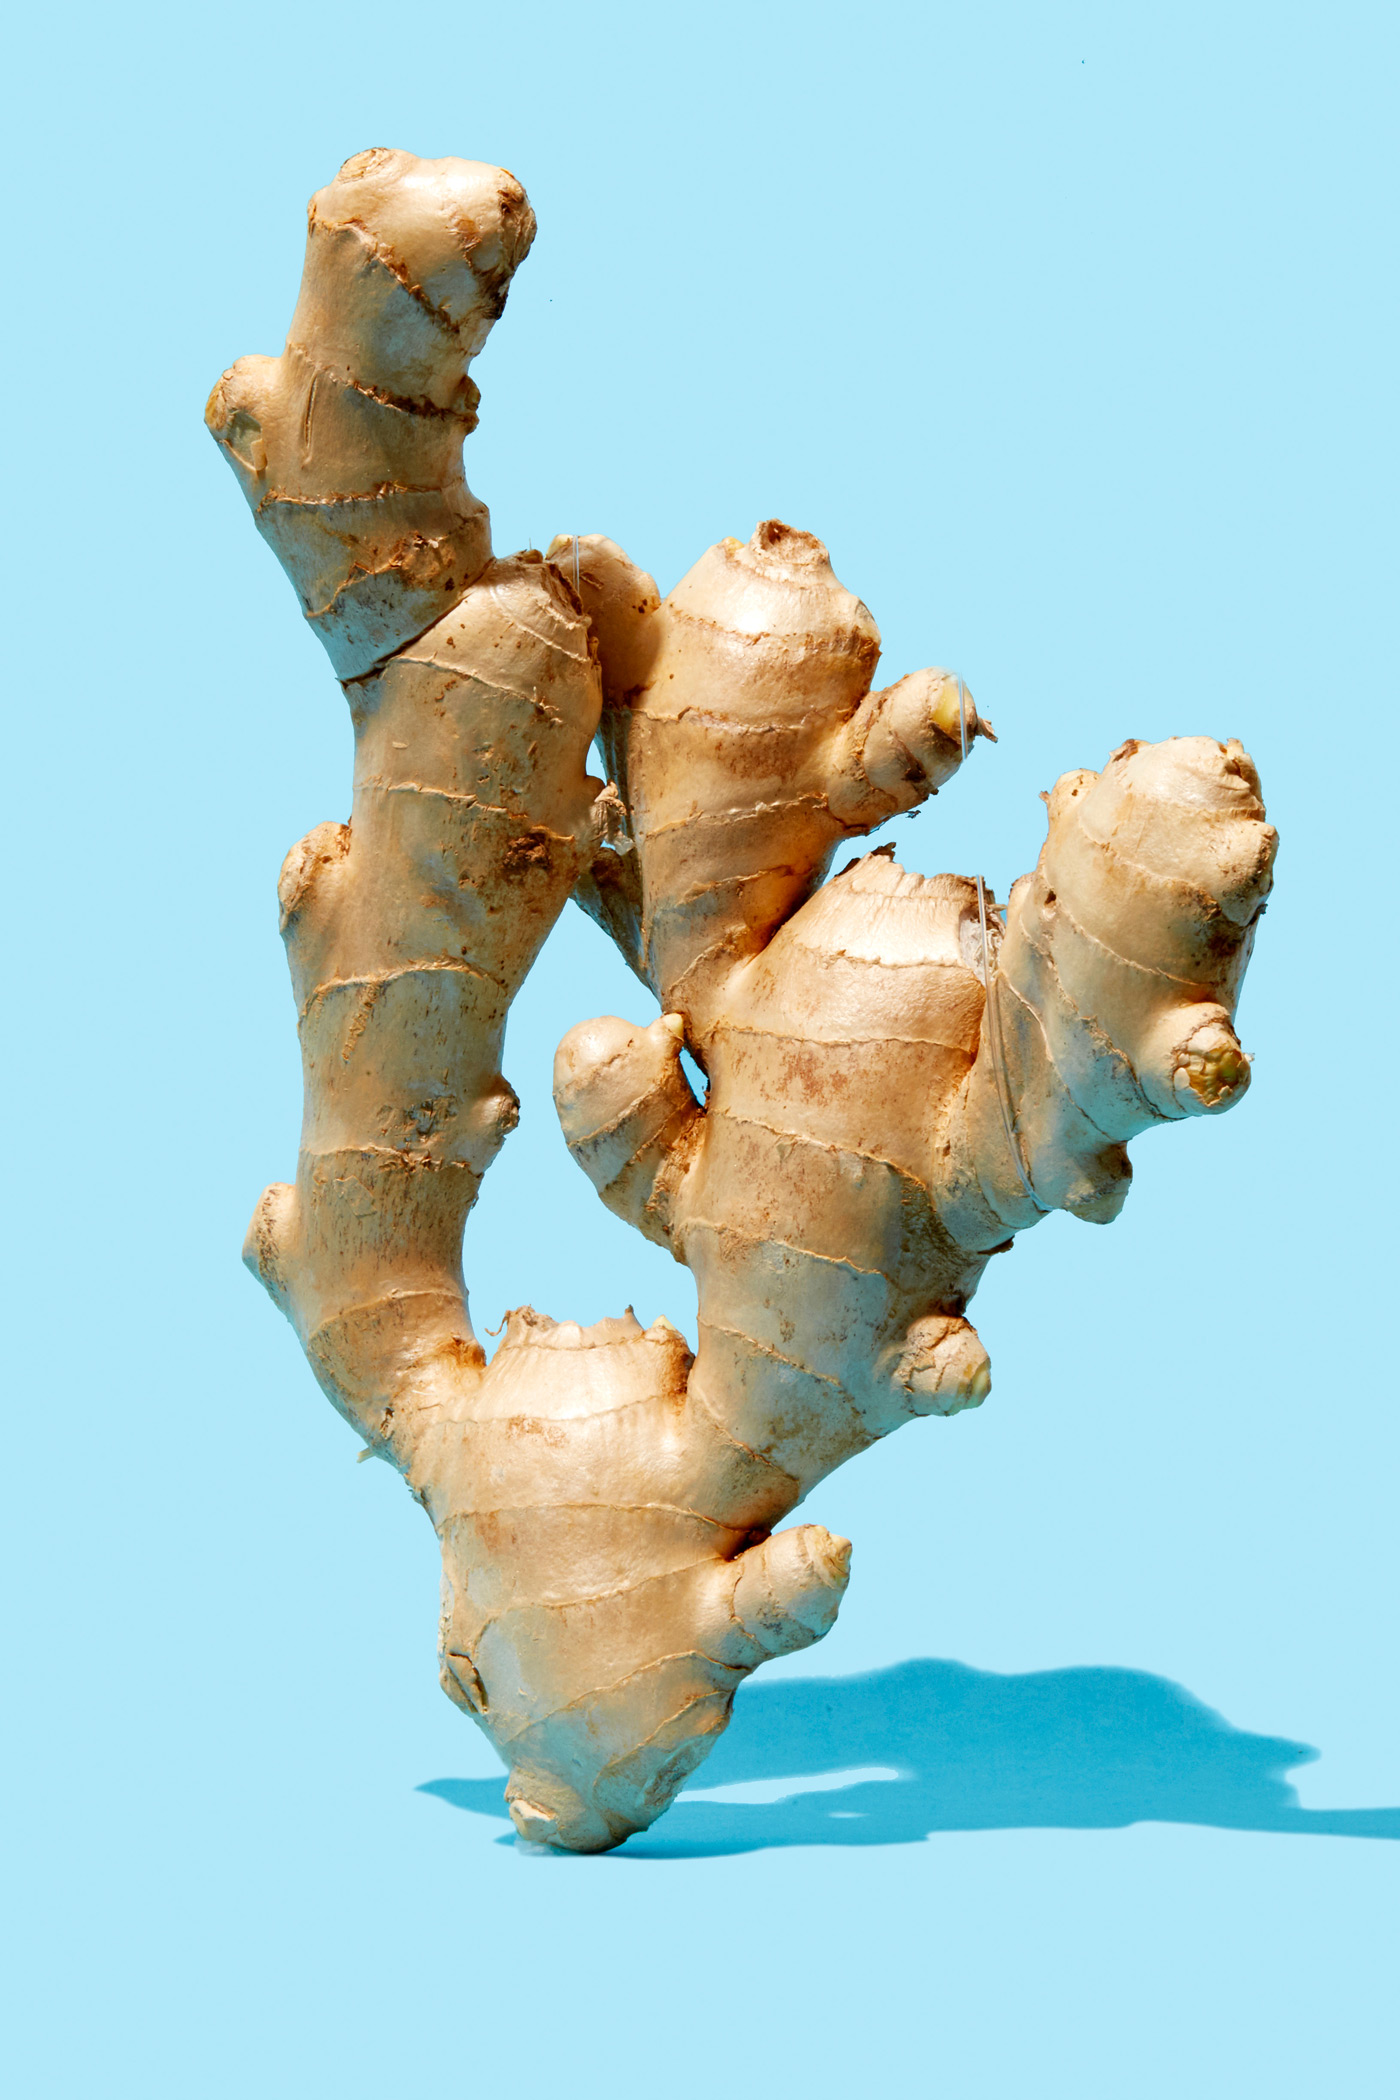 healthiest foods, health food, diet, nutrition, time.com stock, ginger